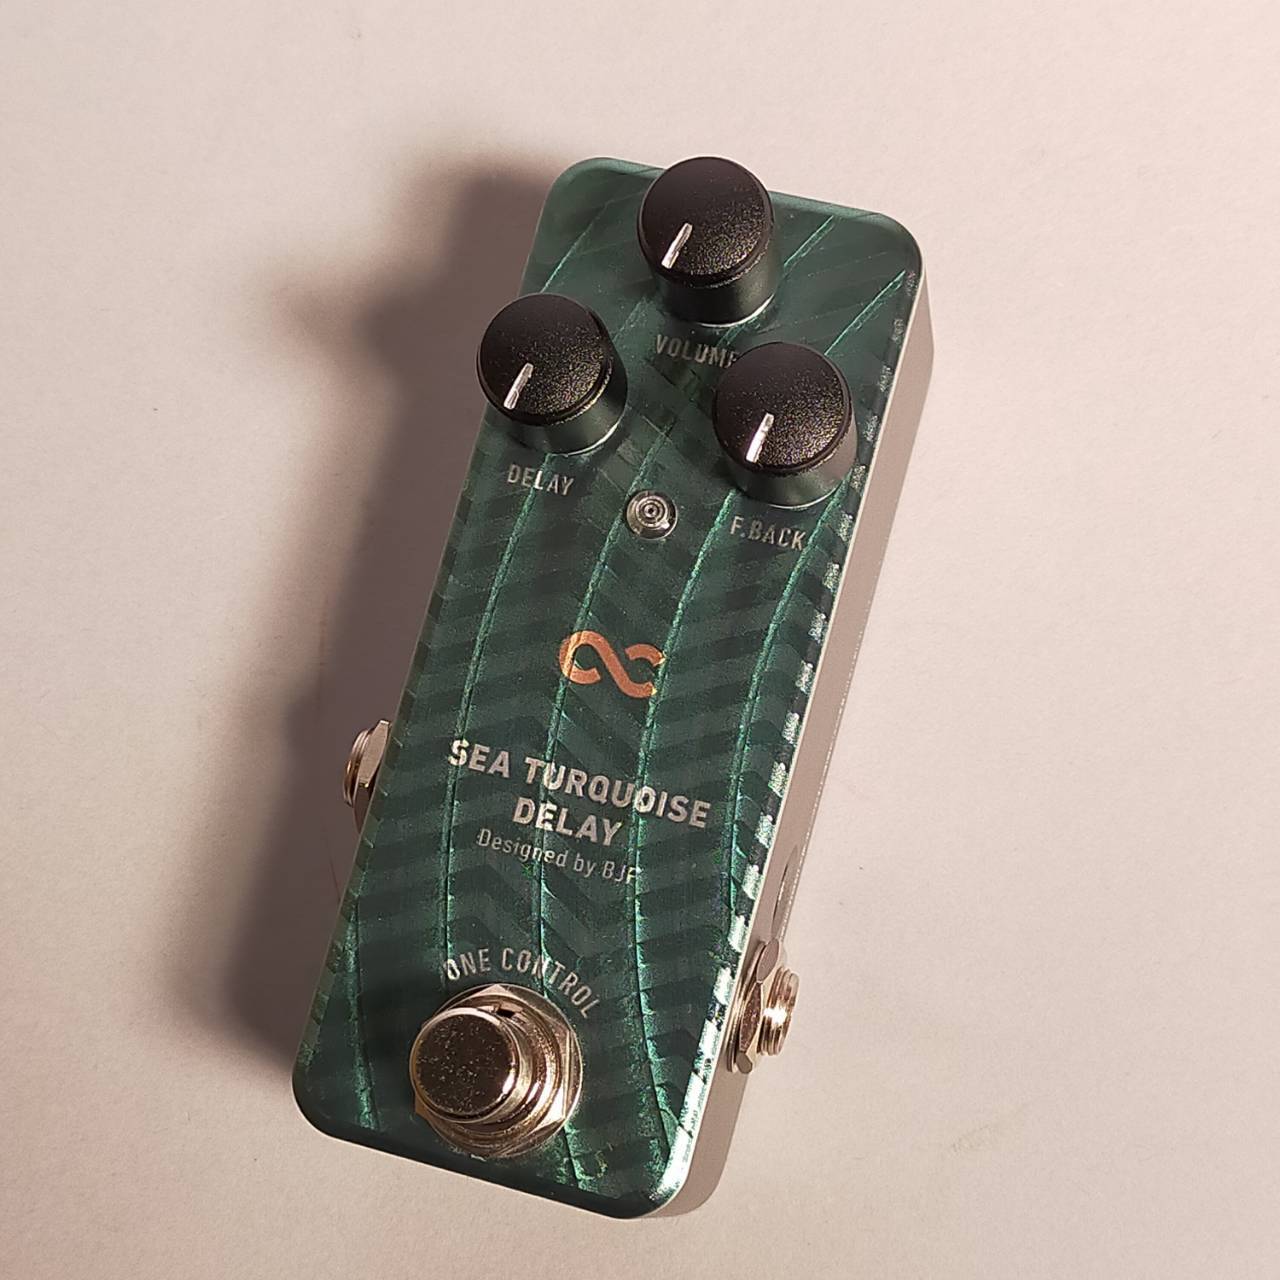 ONE CONTROL SEA TURQUOISE DELAY コンパクトエフェクター ディレイ ...